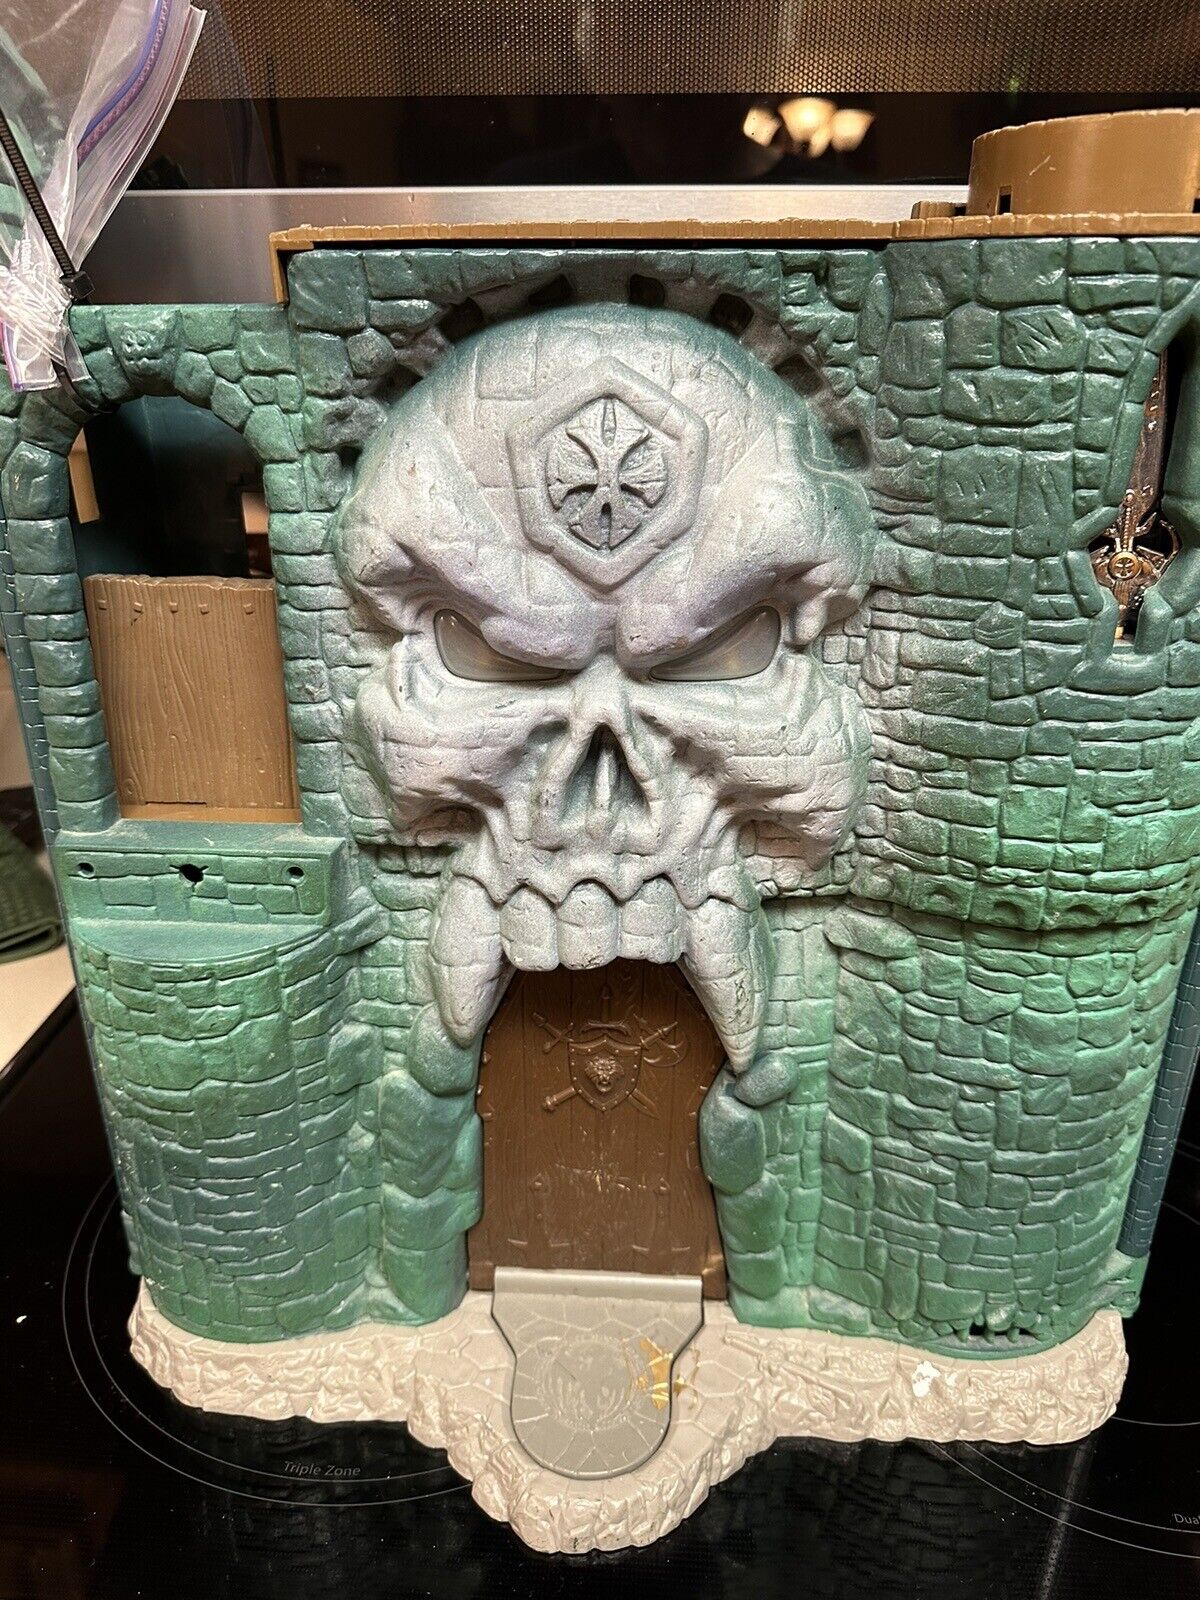 Mattel CASTLE GRAYSKULL Playset MASTERS Of The UNIVERSE He-Man 2002 / 200X 7in.